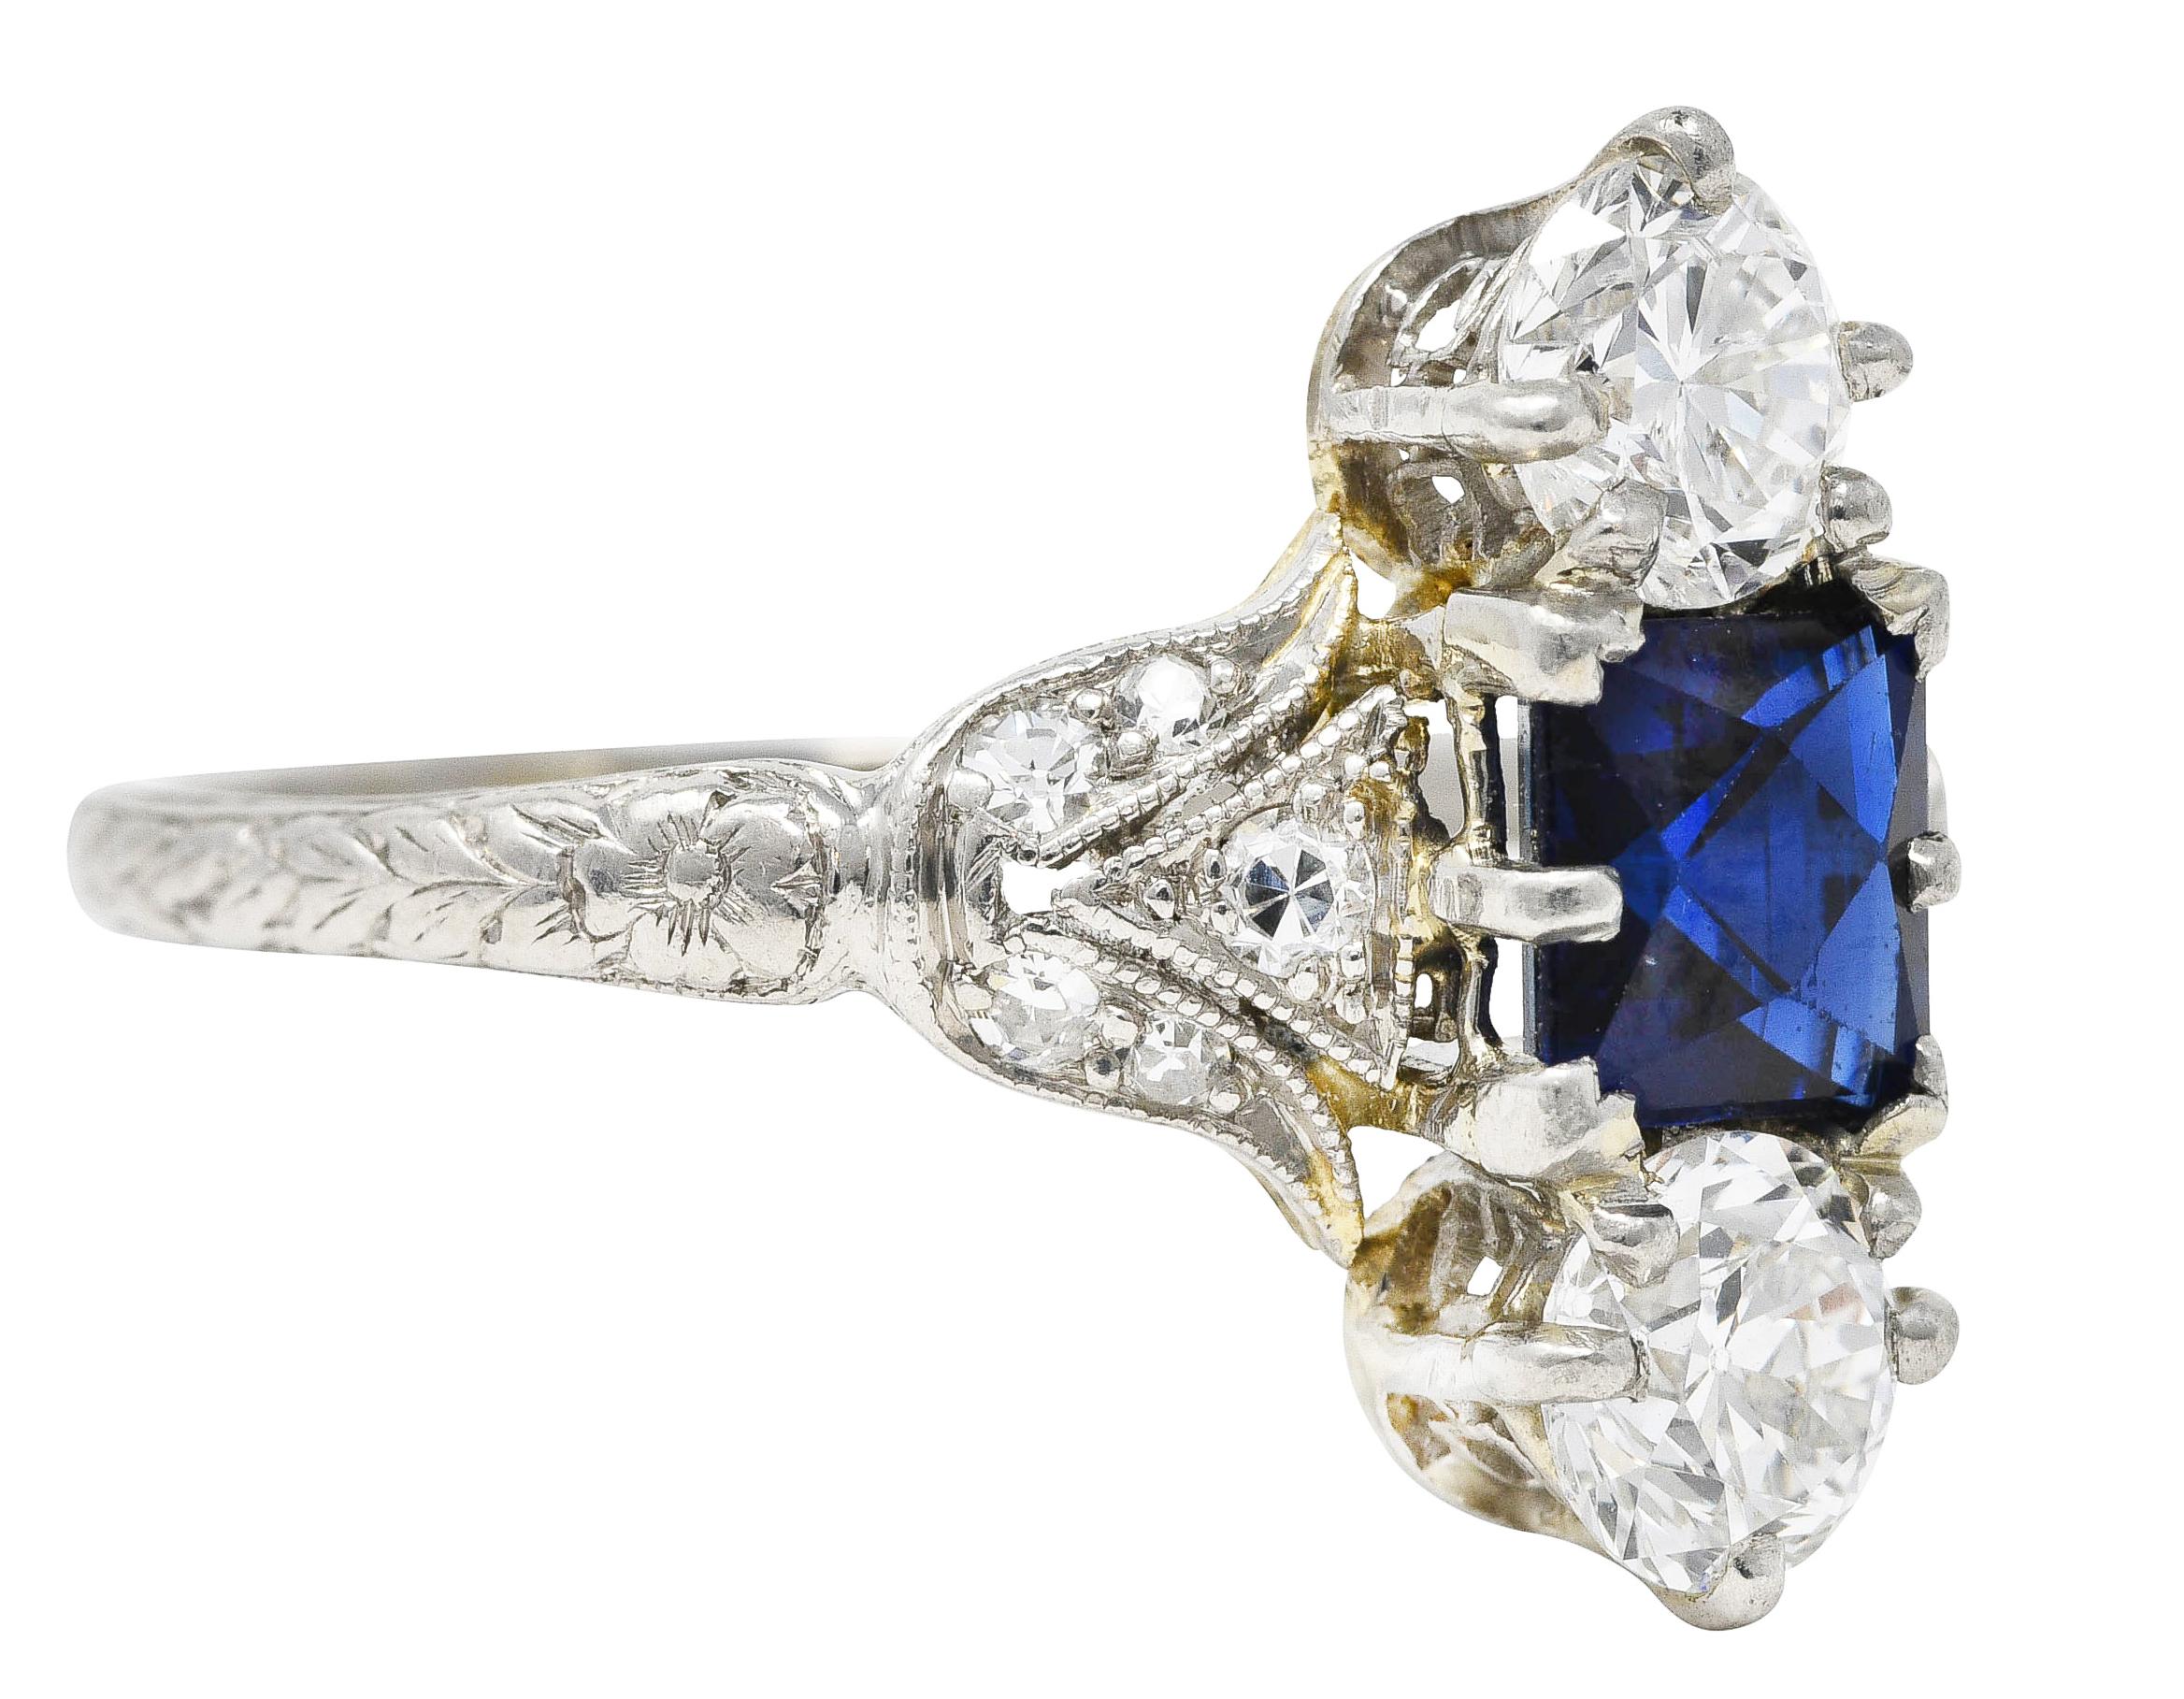 Antique ring features three basket set gemstones set North to South. Centering a French cut sapphire weighing approximately 0.85 carat - medium dark blue. Flanked by a transitional and an old European cut diamond. Weighing 0.70 carat total with well